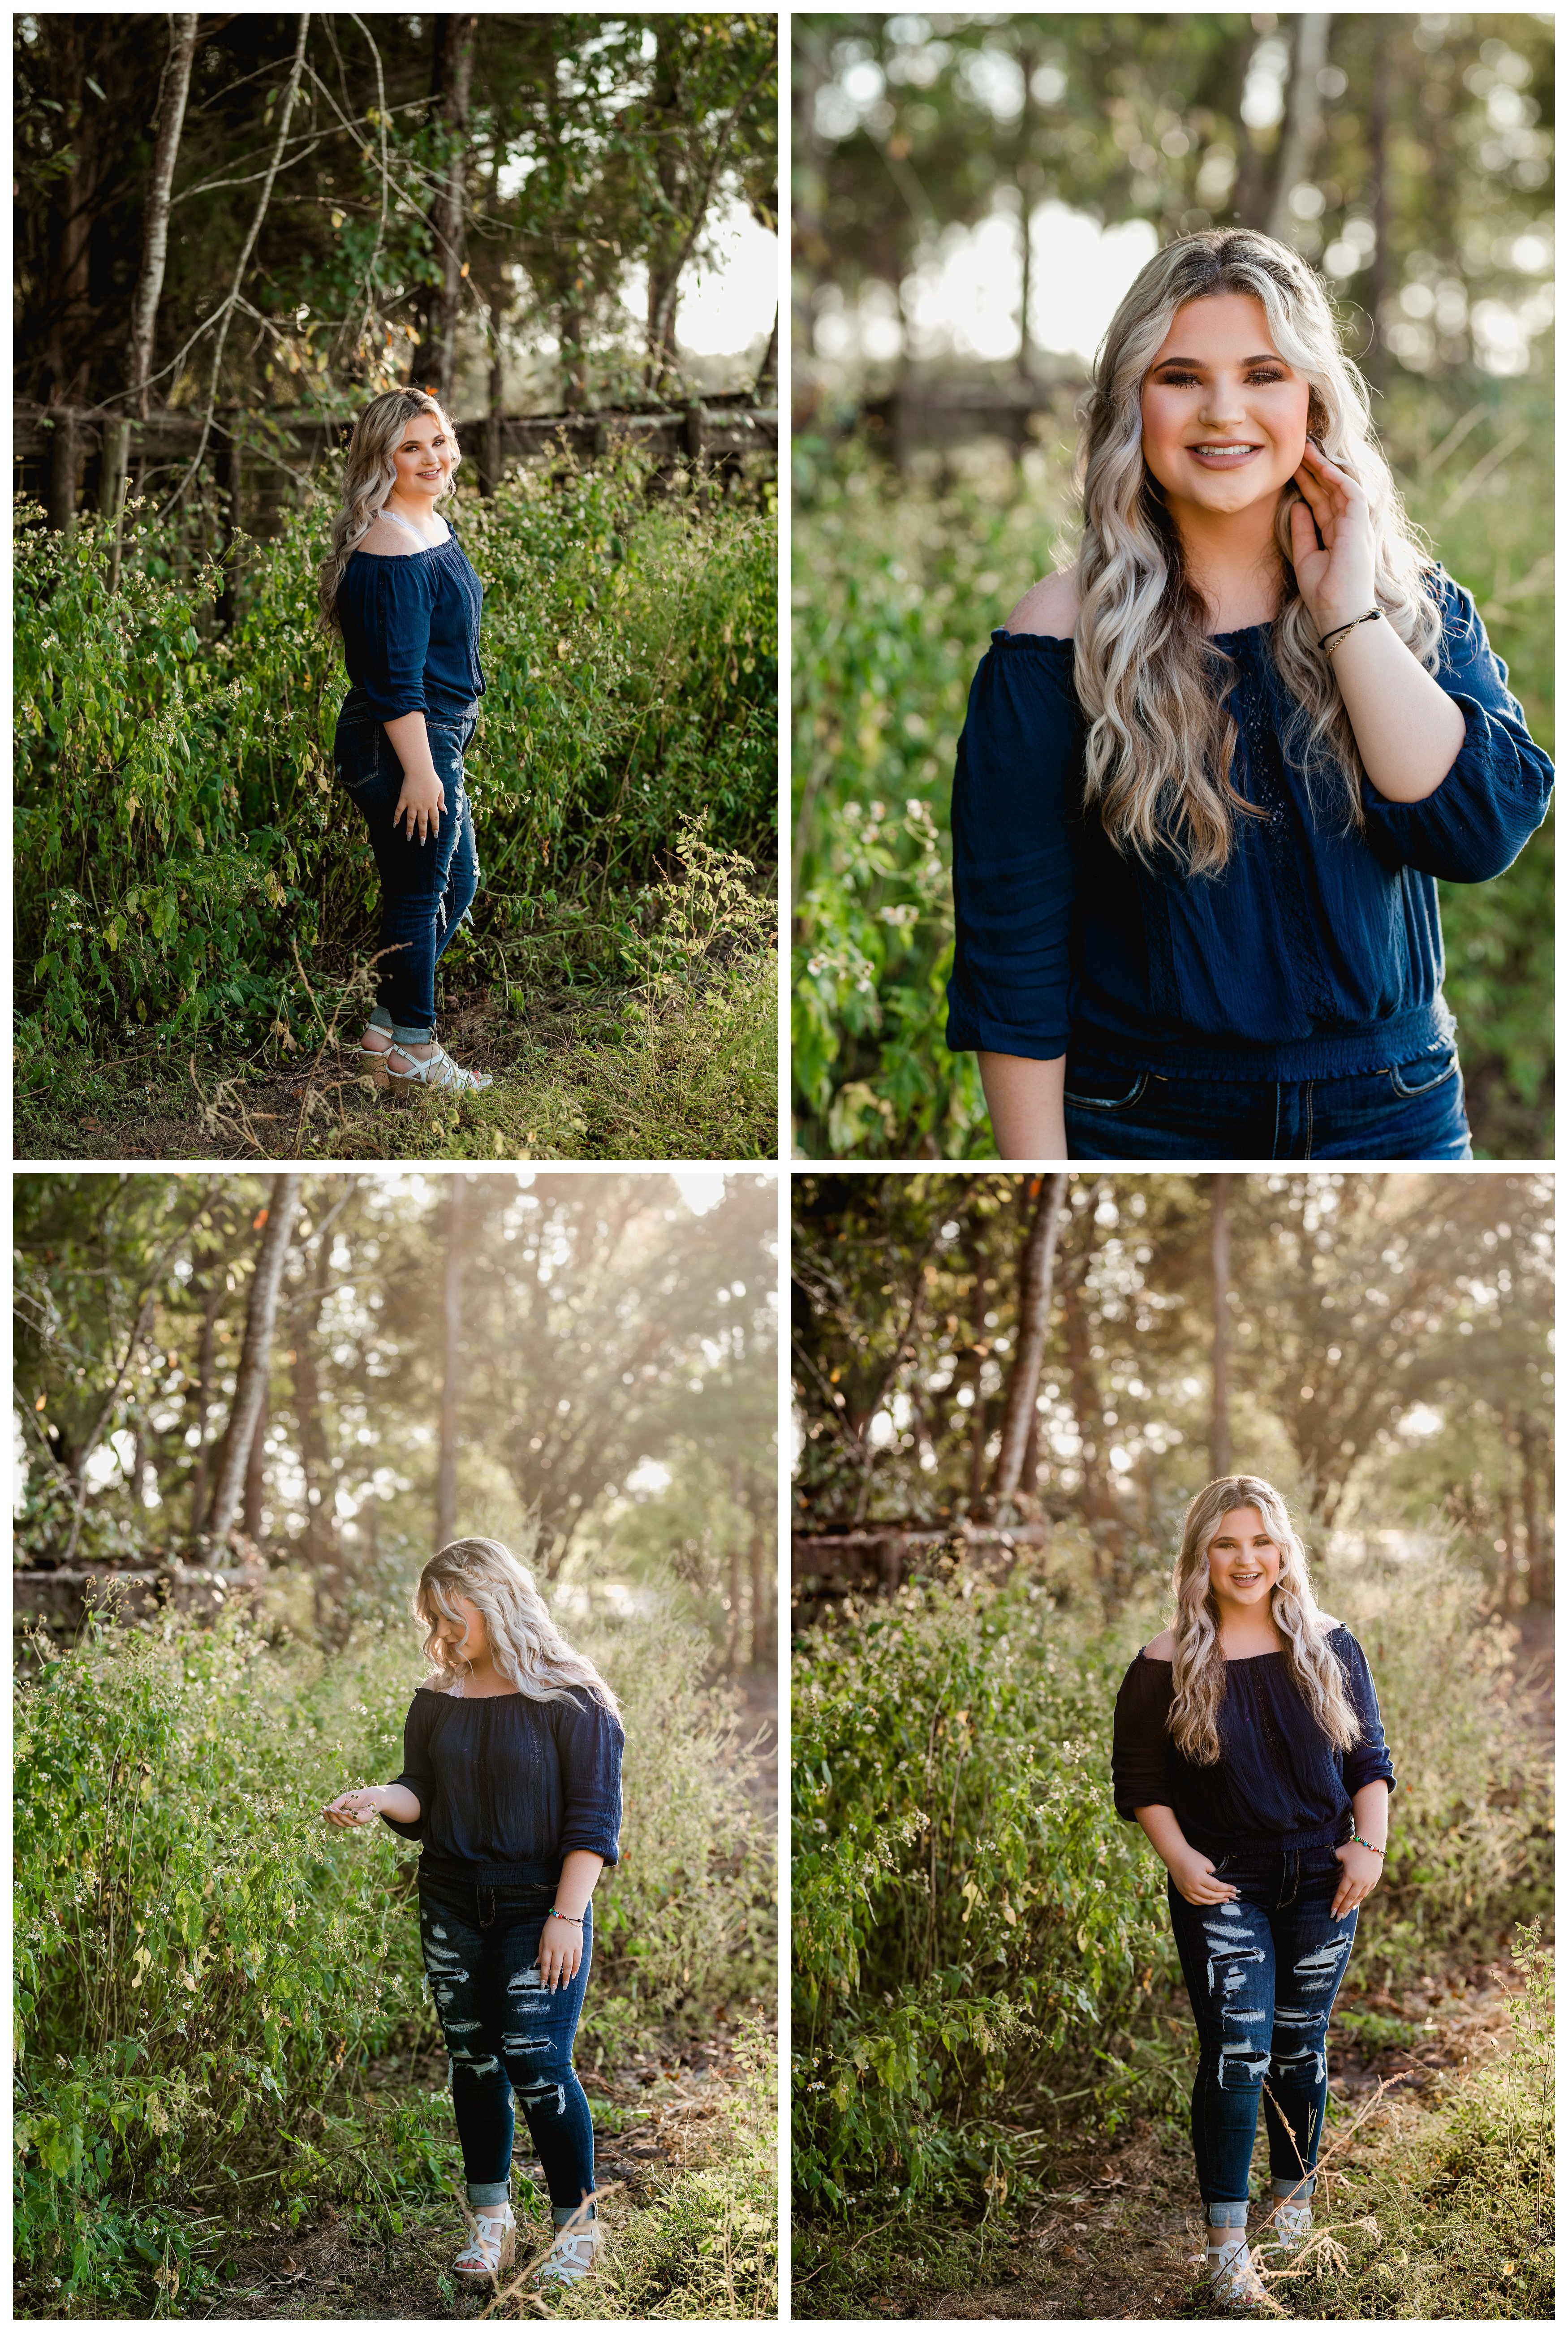 Lifestyle senior photography with mostly candid moments.